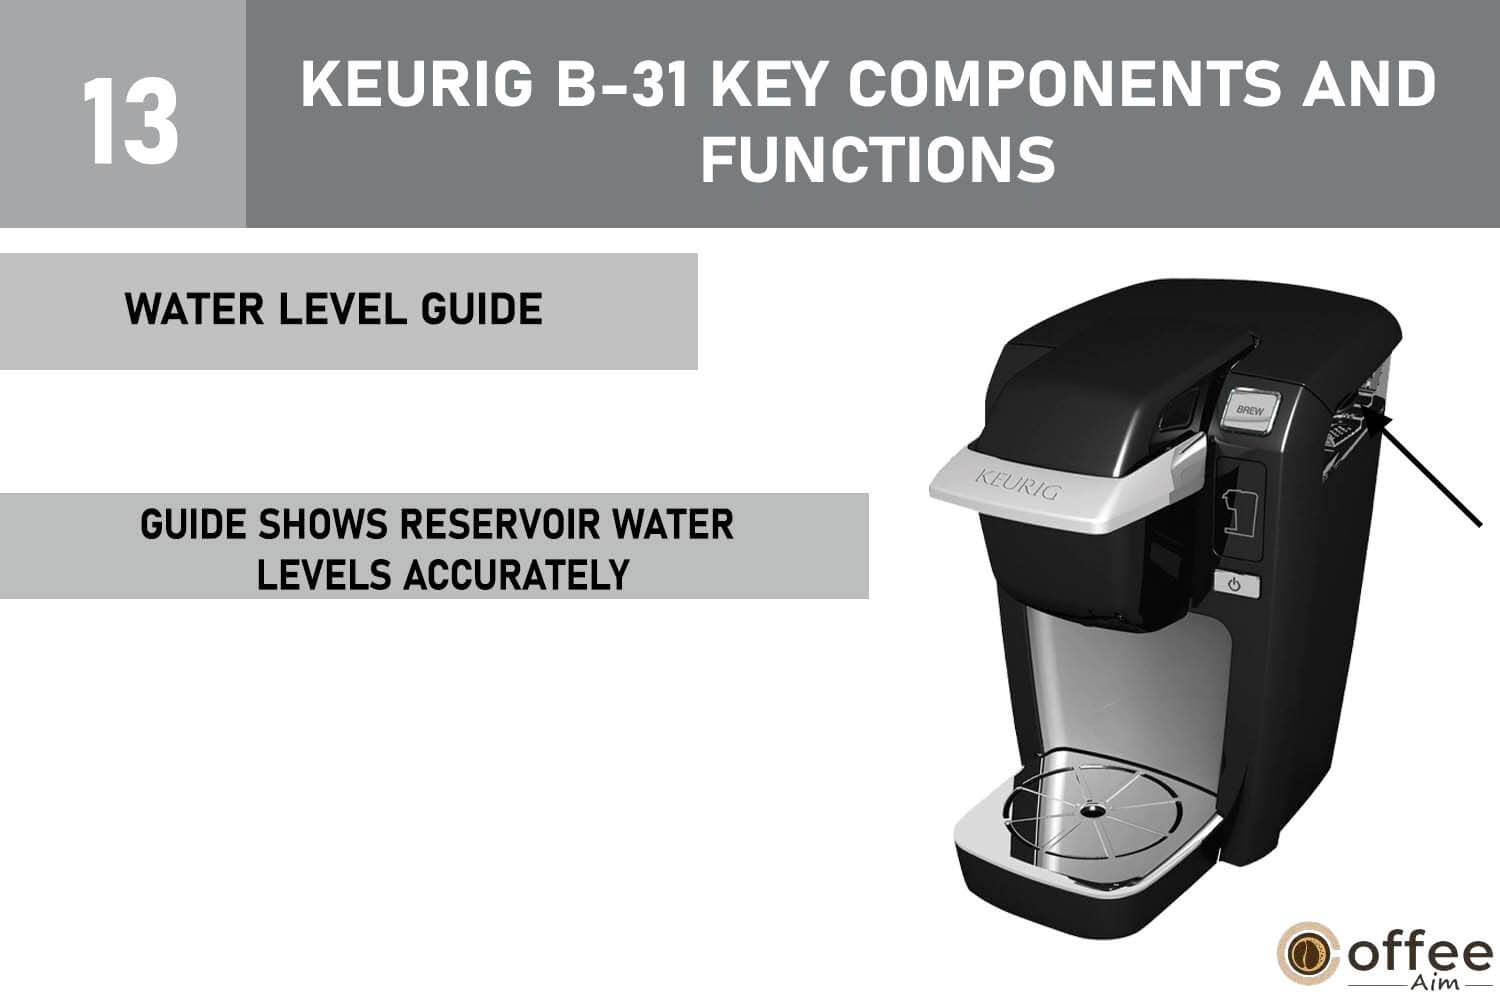 This image illustrates the component known as the "Water Level Guide" on the Keurig B-31 coffee maker, as featured in the comprehensive guide on using the Keurig B-31.